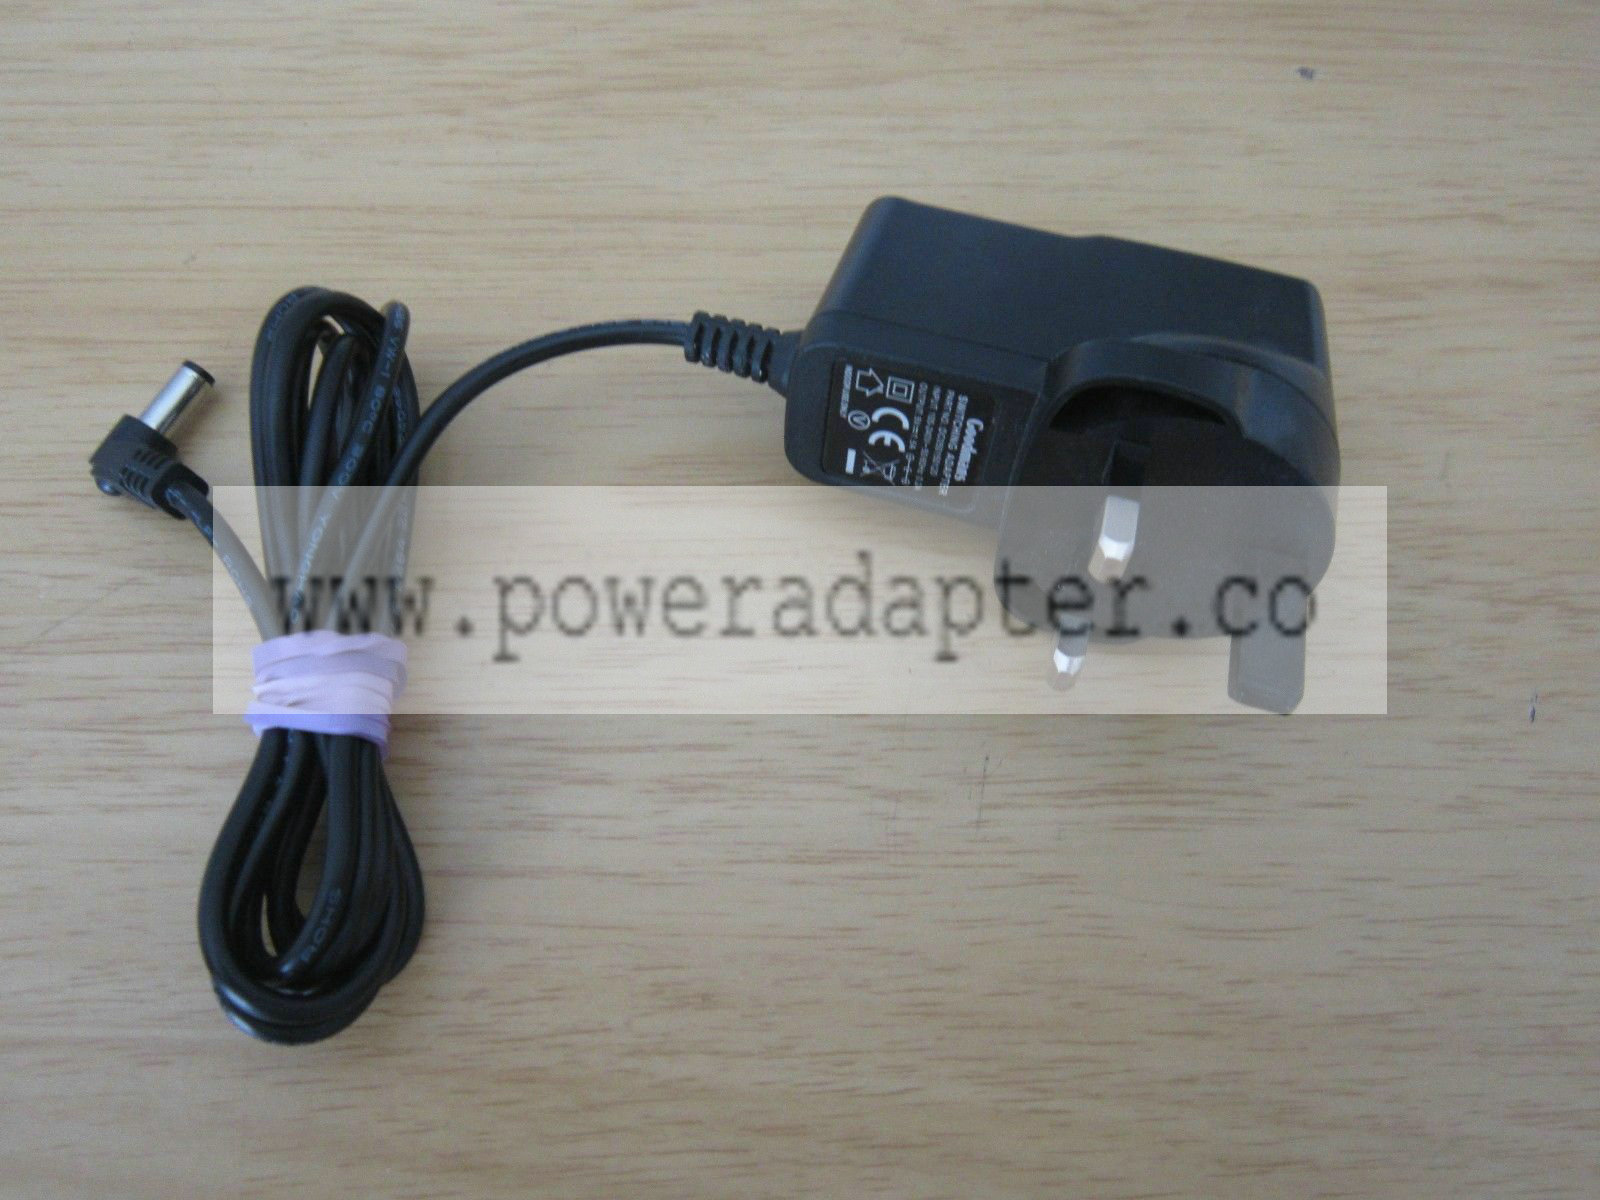 TRANSFORMER POWER SUPPLY ADAPTER GOODMANS DC050150120 5V 1.5A *11 Working like it should maybe useful to someone th